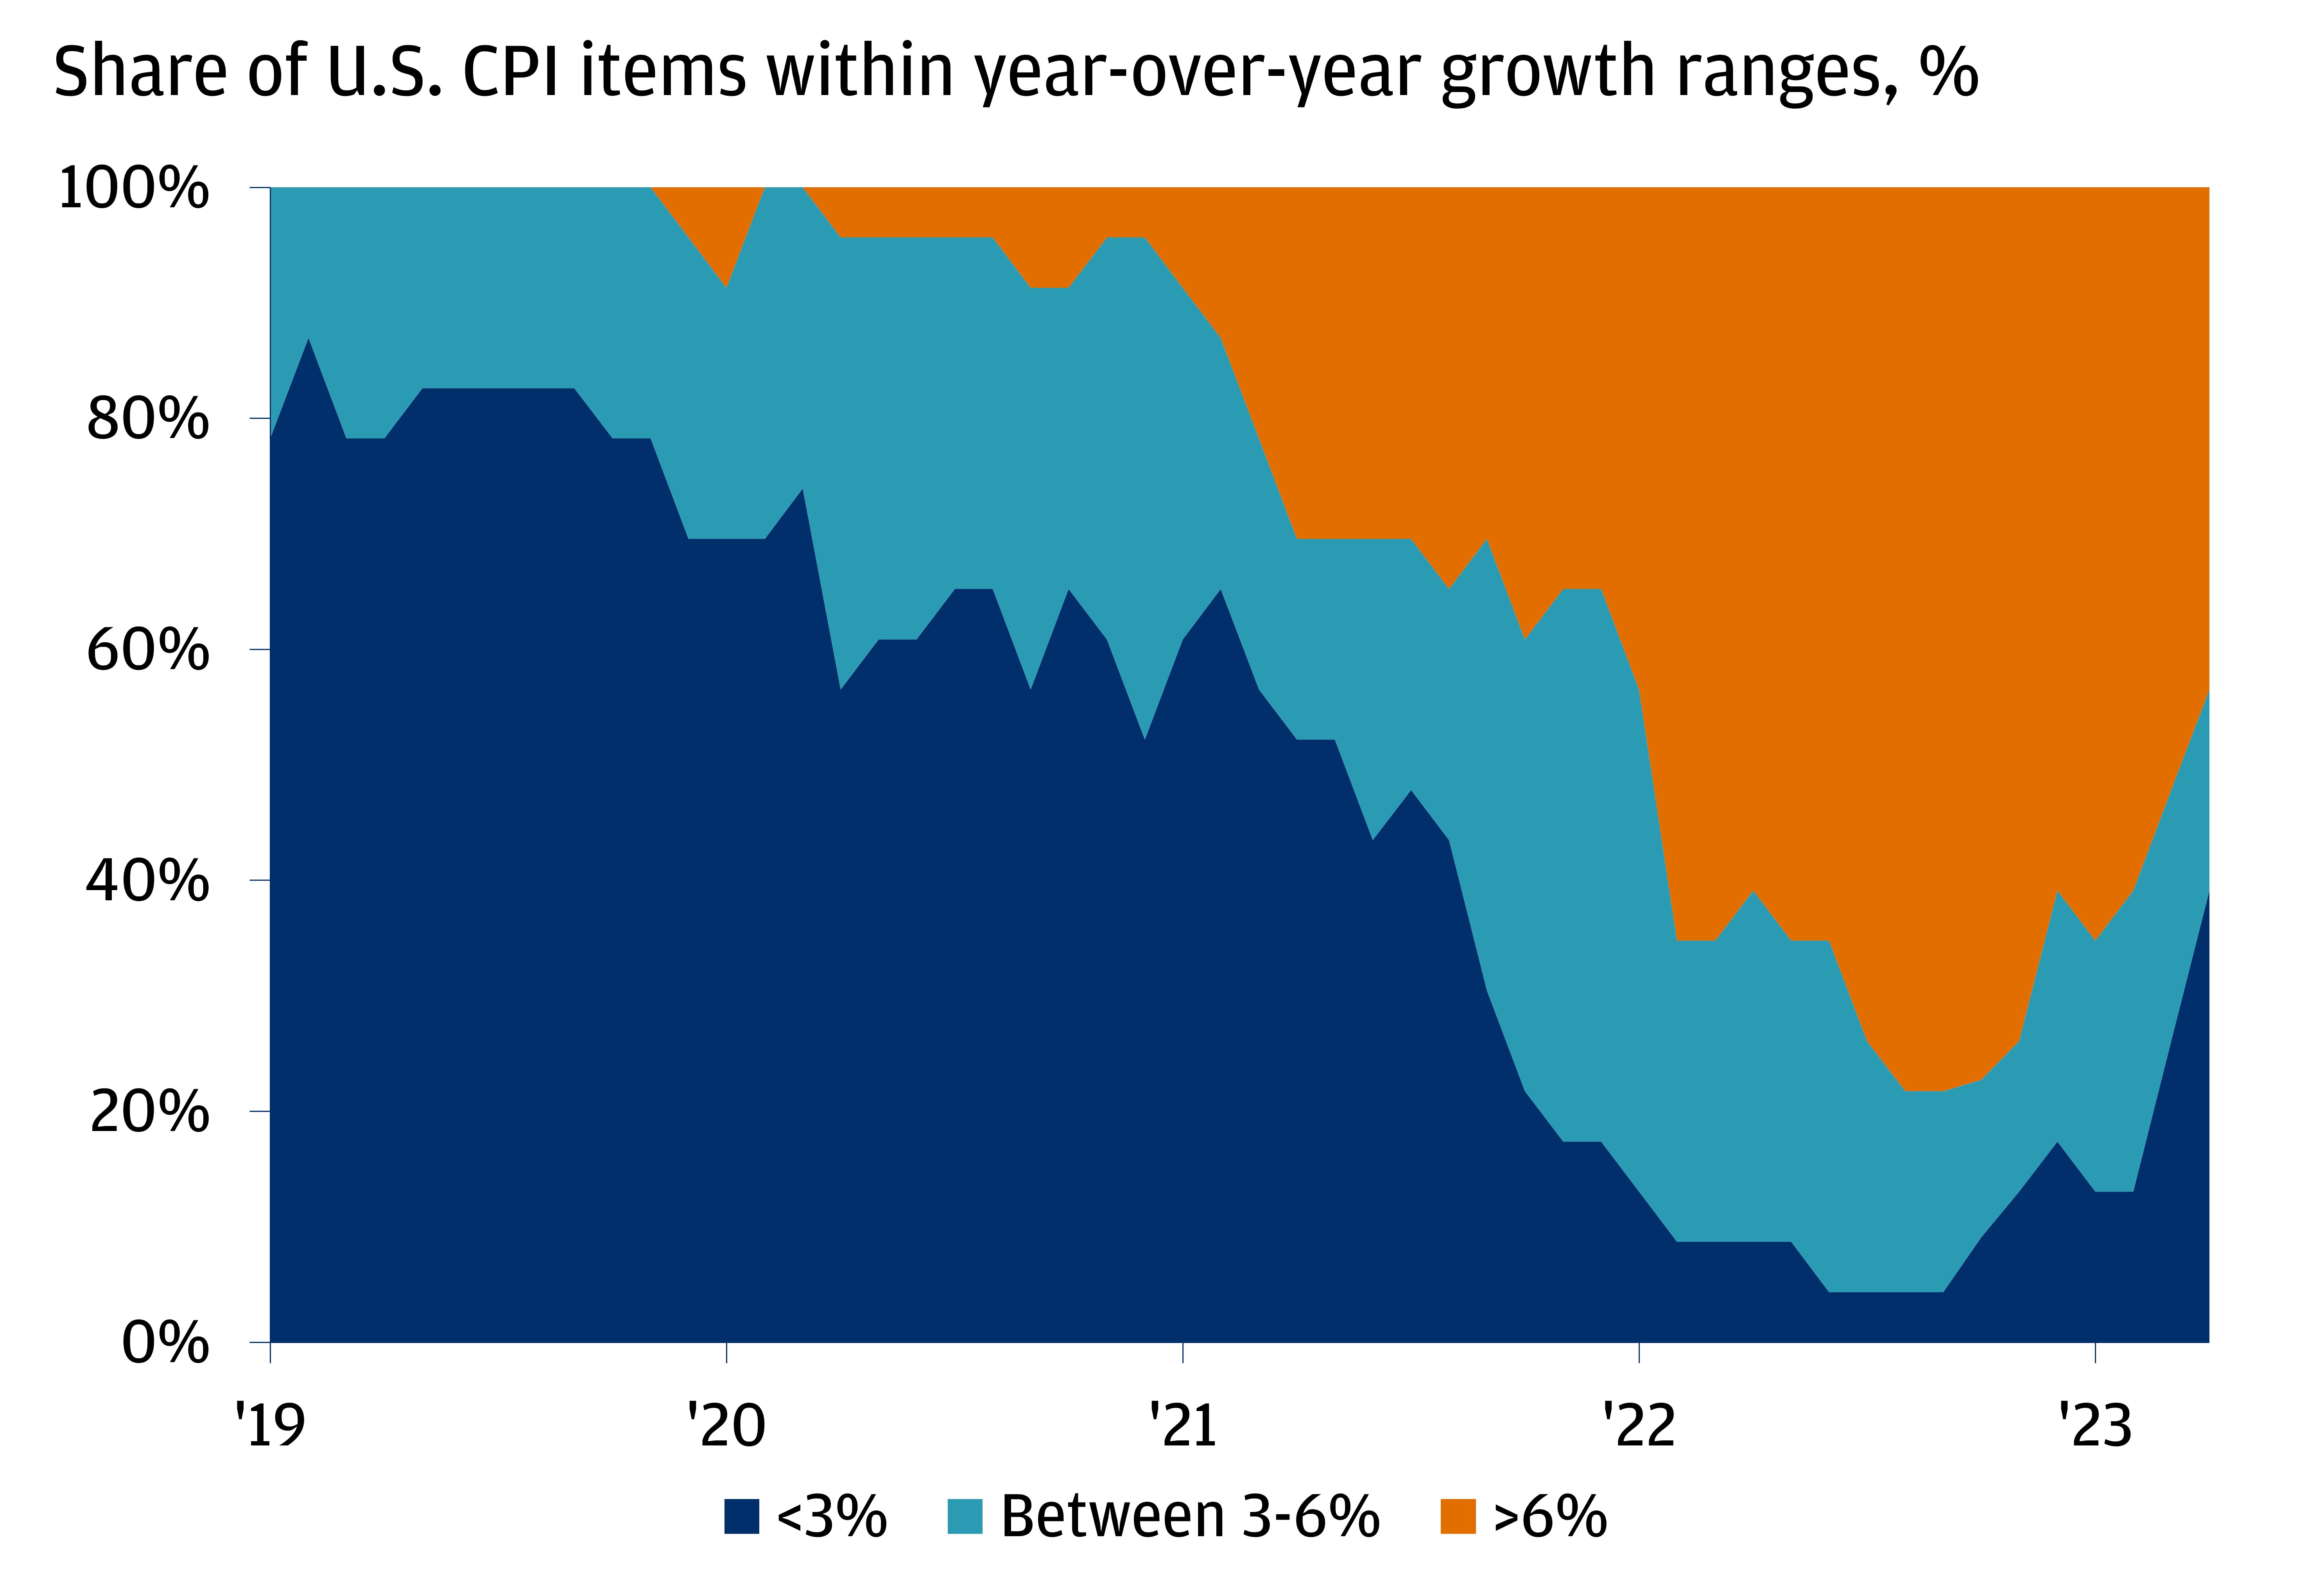 The chart describes the percentage share of U.S. CPI items within year-over-year growth ranges of <3%, between 3–6%, and >6%.